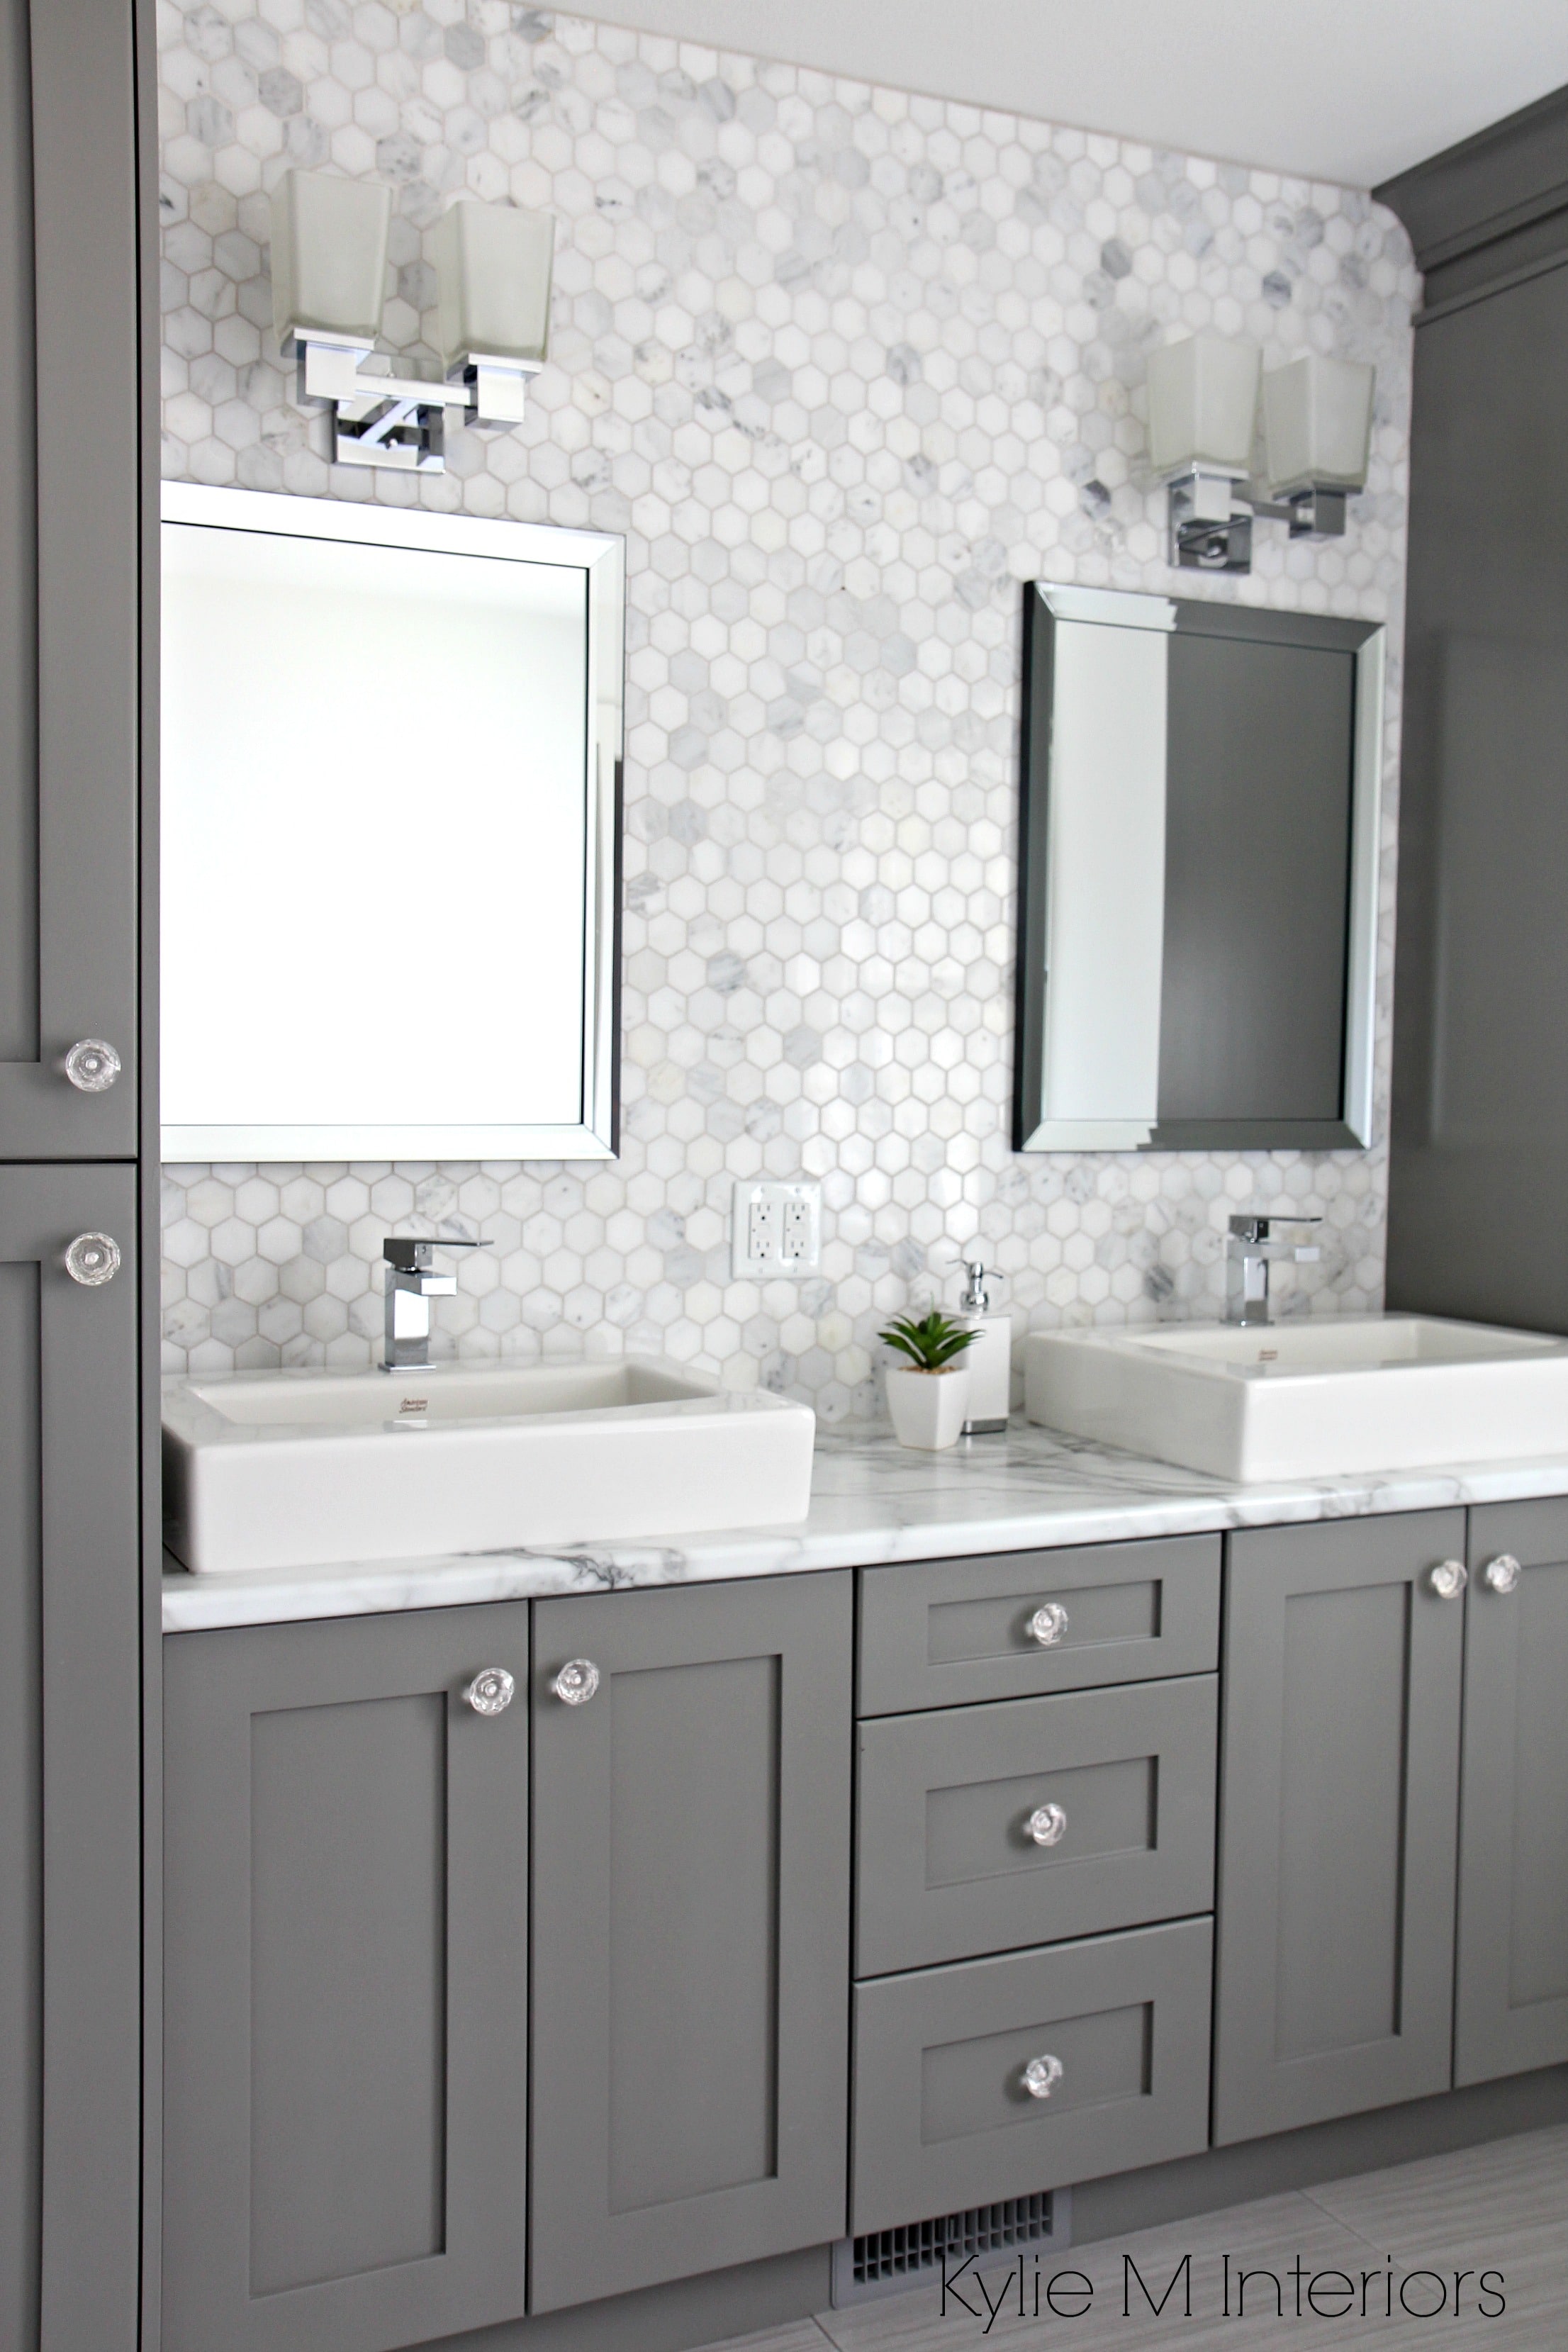 Marble backsplash in hexagon shape with vanity cabinets painted Chelsea Gray, double sinks and chrome accents by Kylie M Interiors